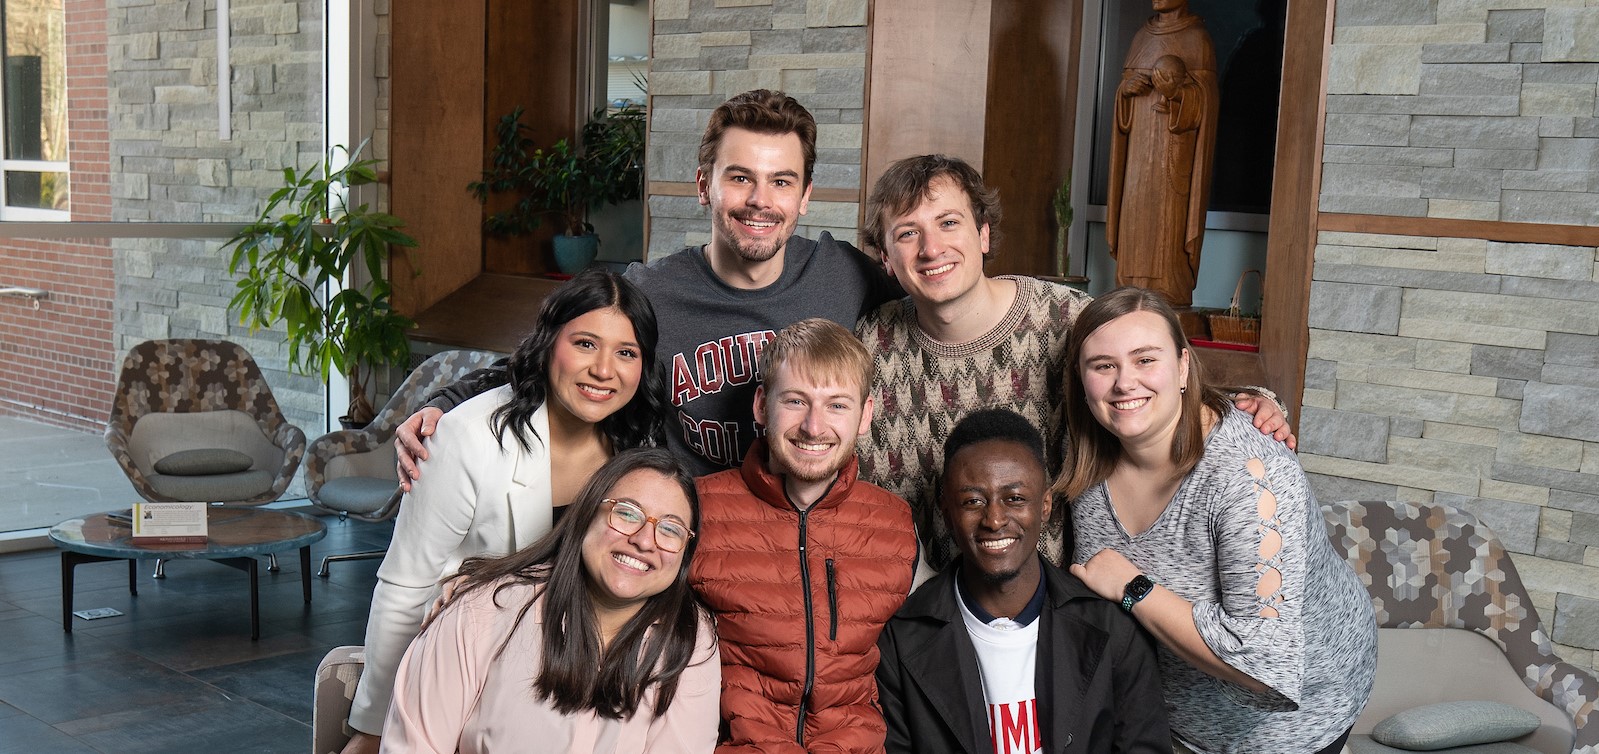 Seven Senior Salute students smiling and posed together on a couch in Albertus Magnus Hall of Science